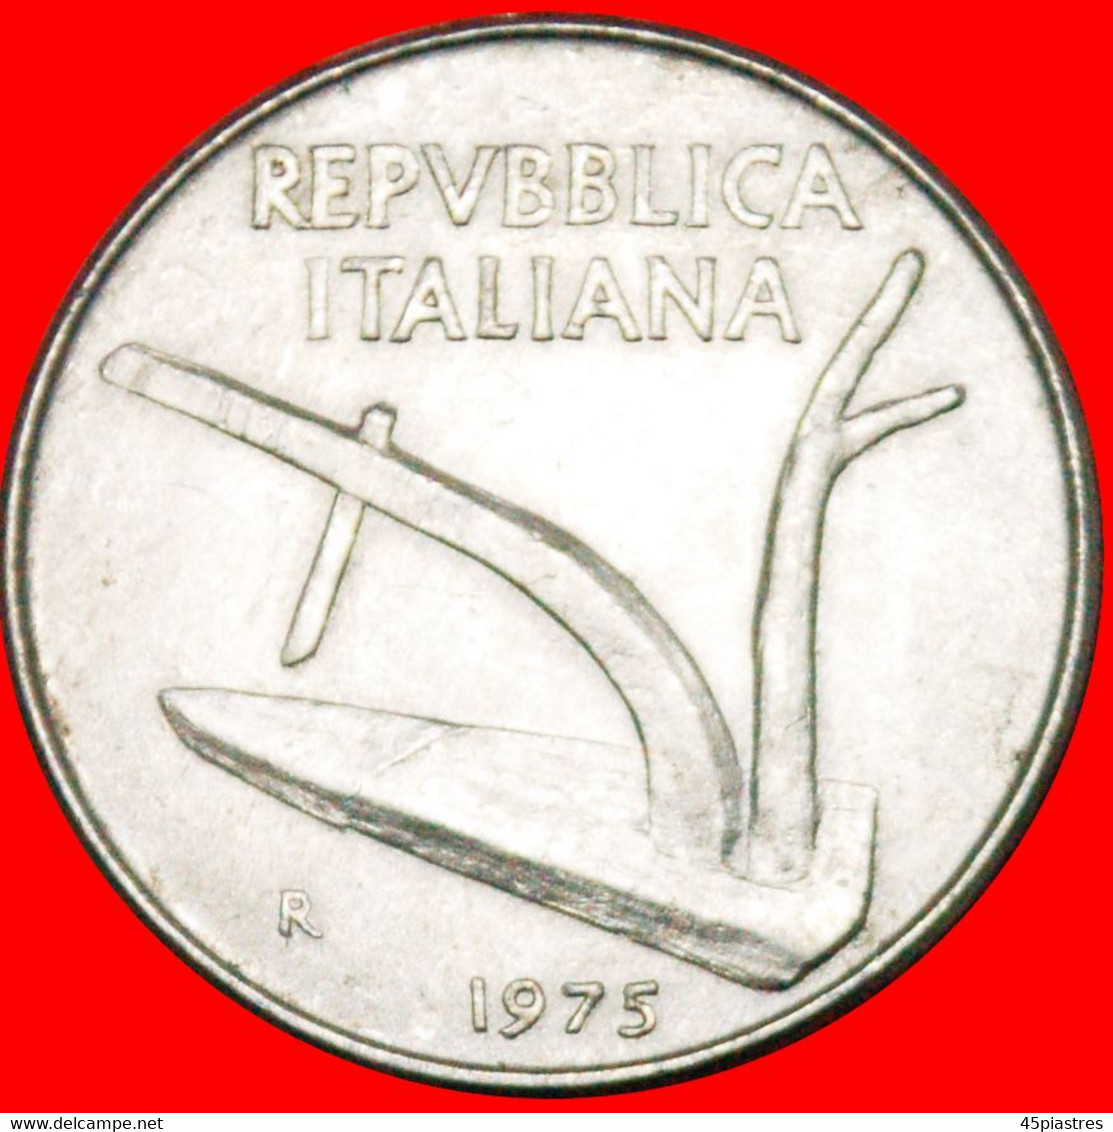 &#9733;PLOUGH AND EARS: ITALY &#9733; 10 LIRE 1975R! LOW START! &#9733; NO RESERVE! - 2 000 Lire